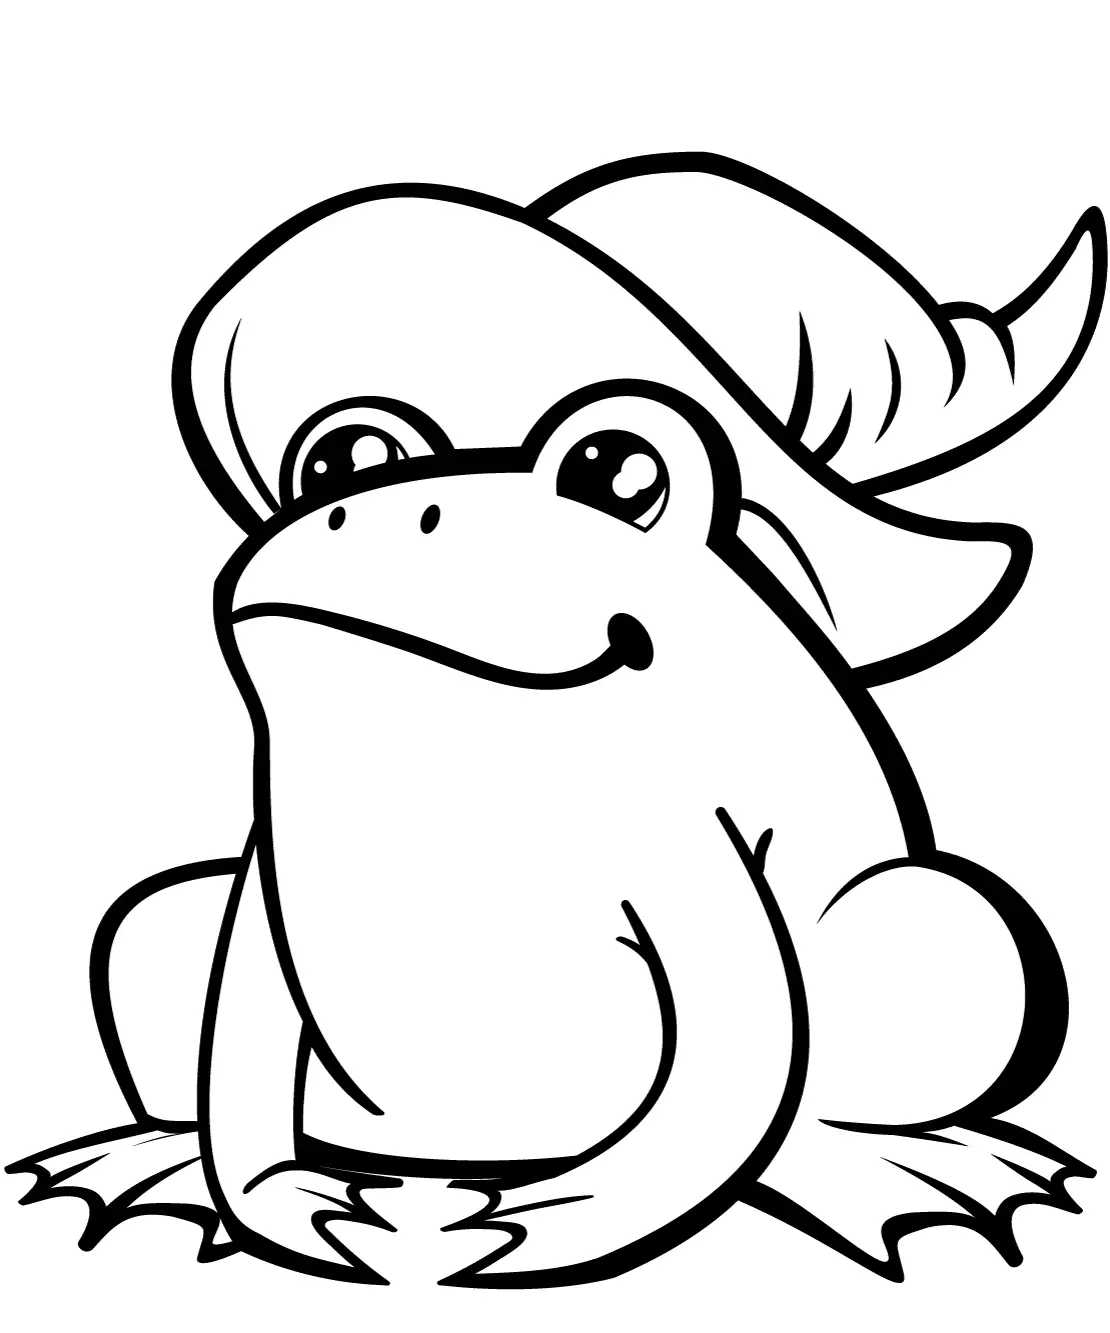 Glorious frog aesthetic coloring page